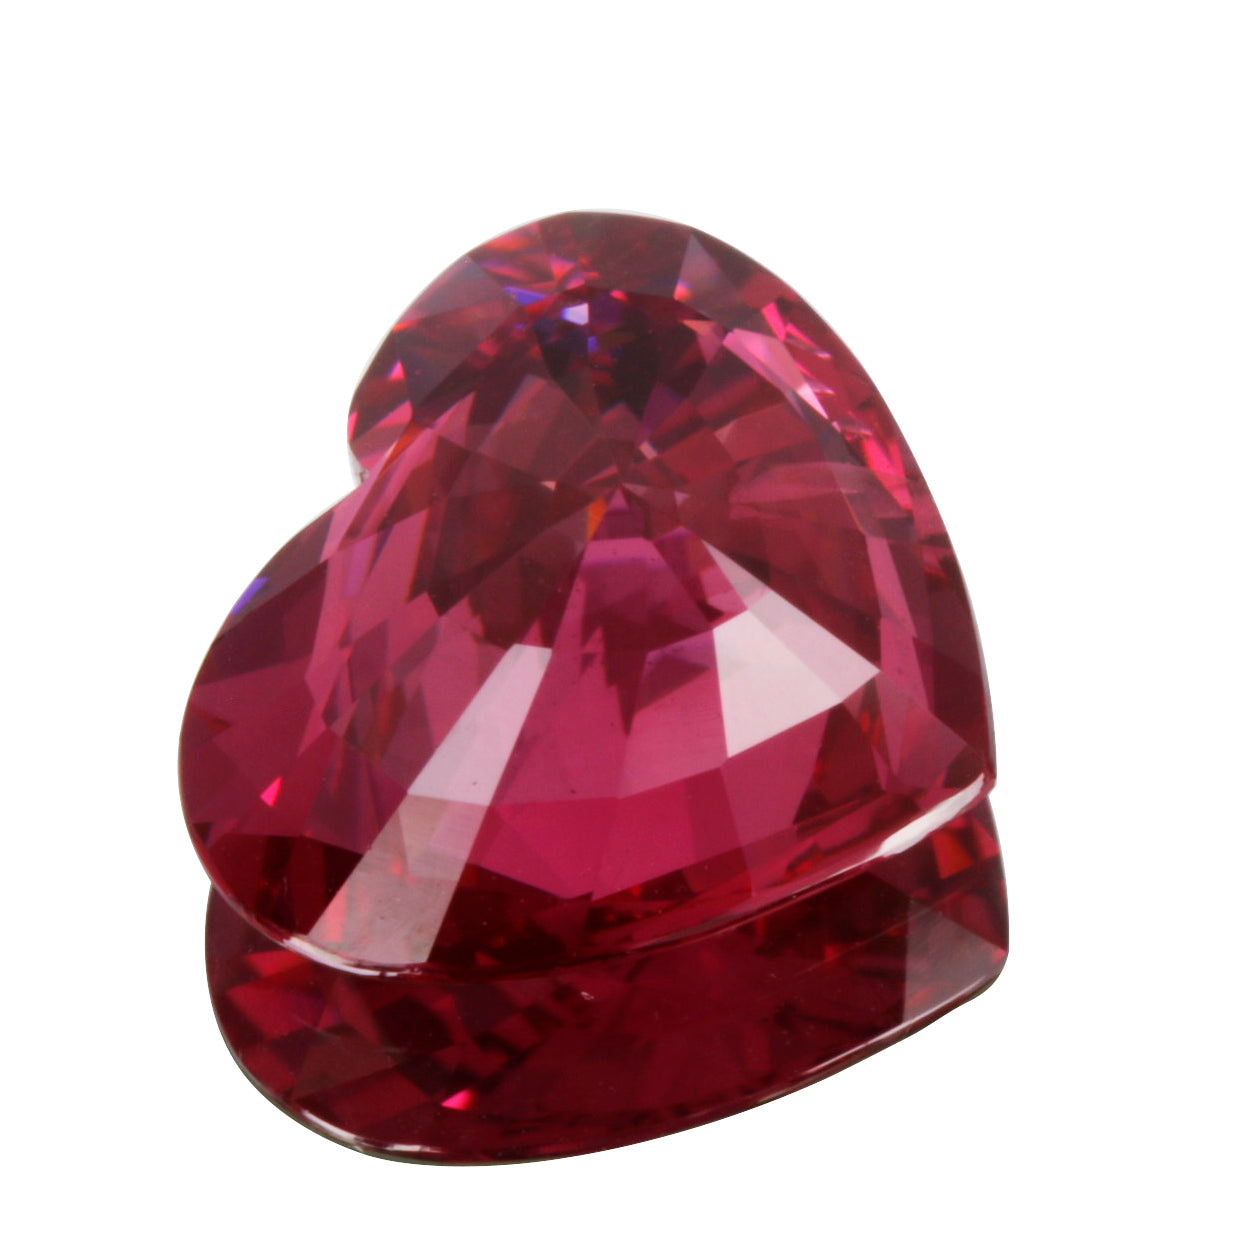 Heart Pink Spinel 2.02 ct